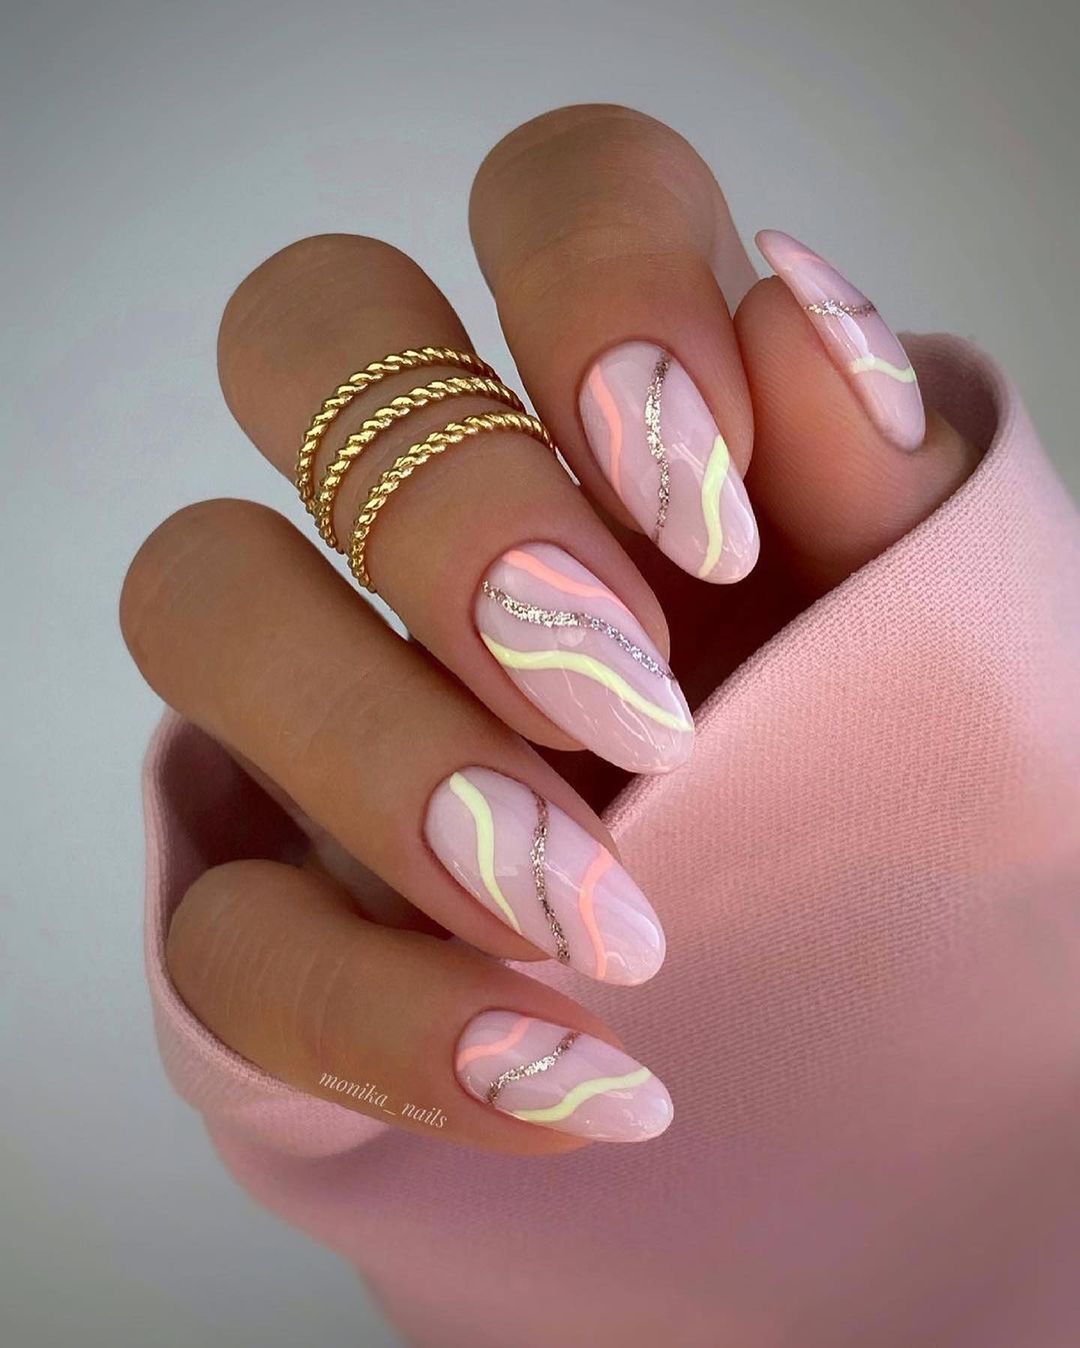 50+ Fall Nail Ideas You’re Going To Obsess Over images 33